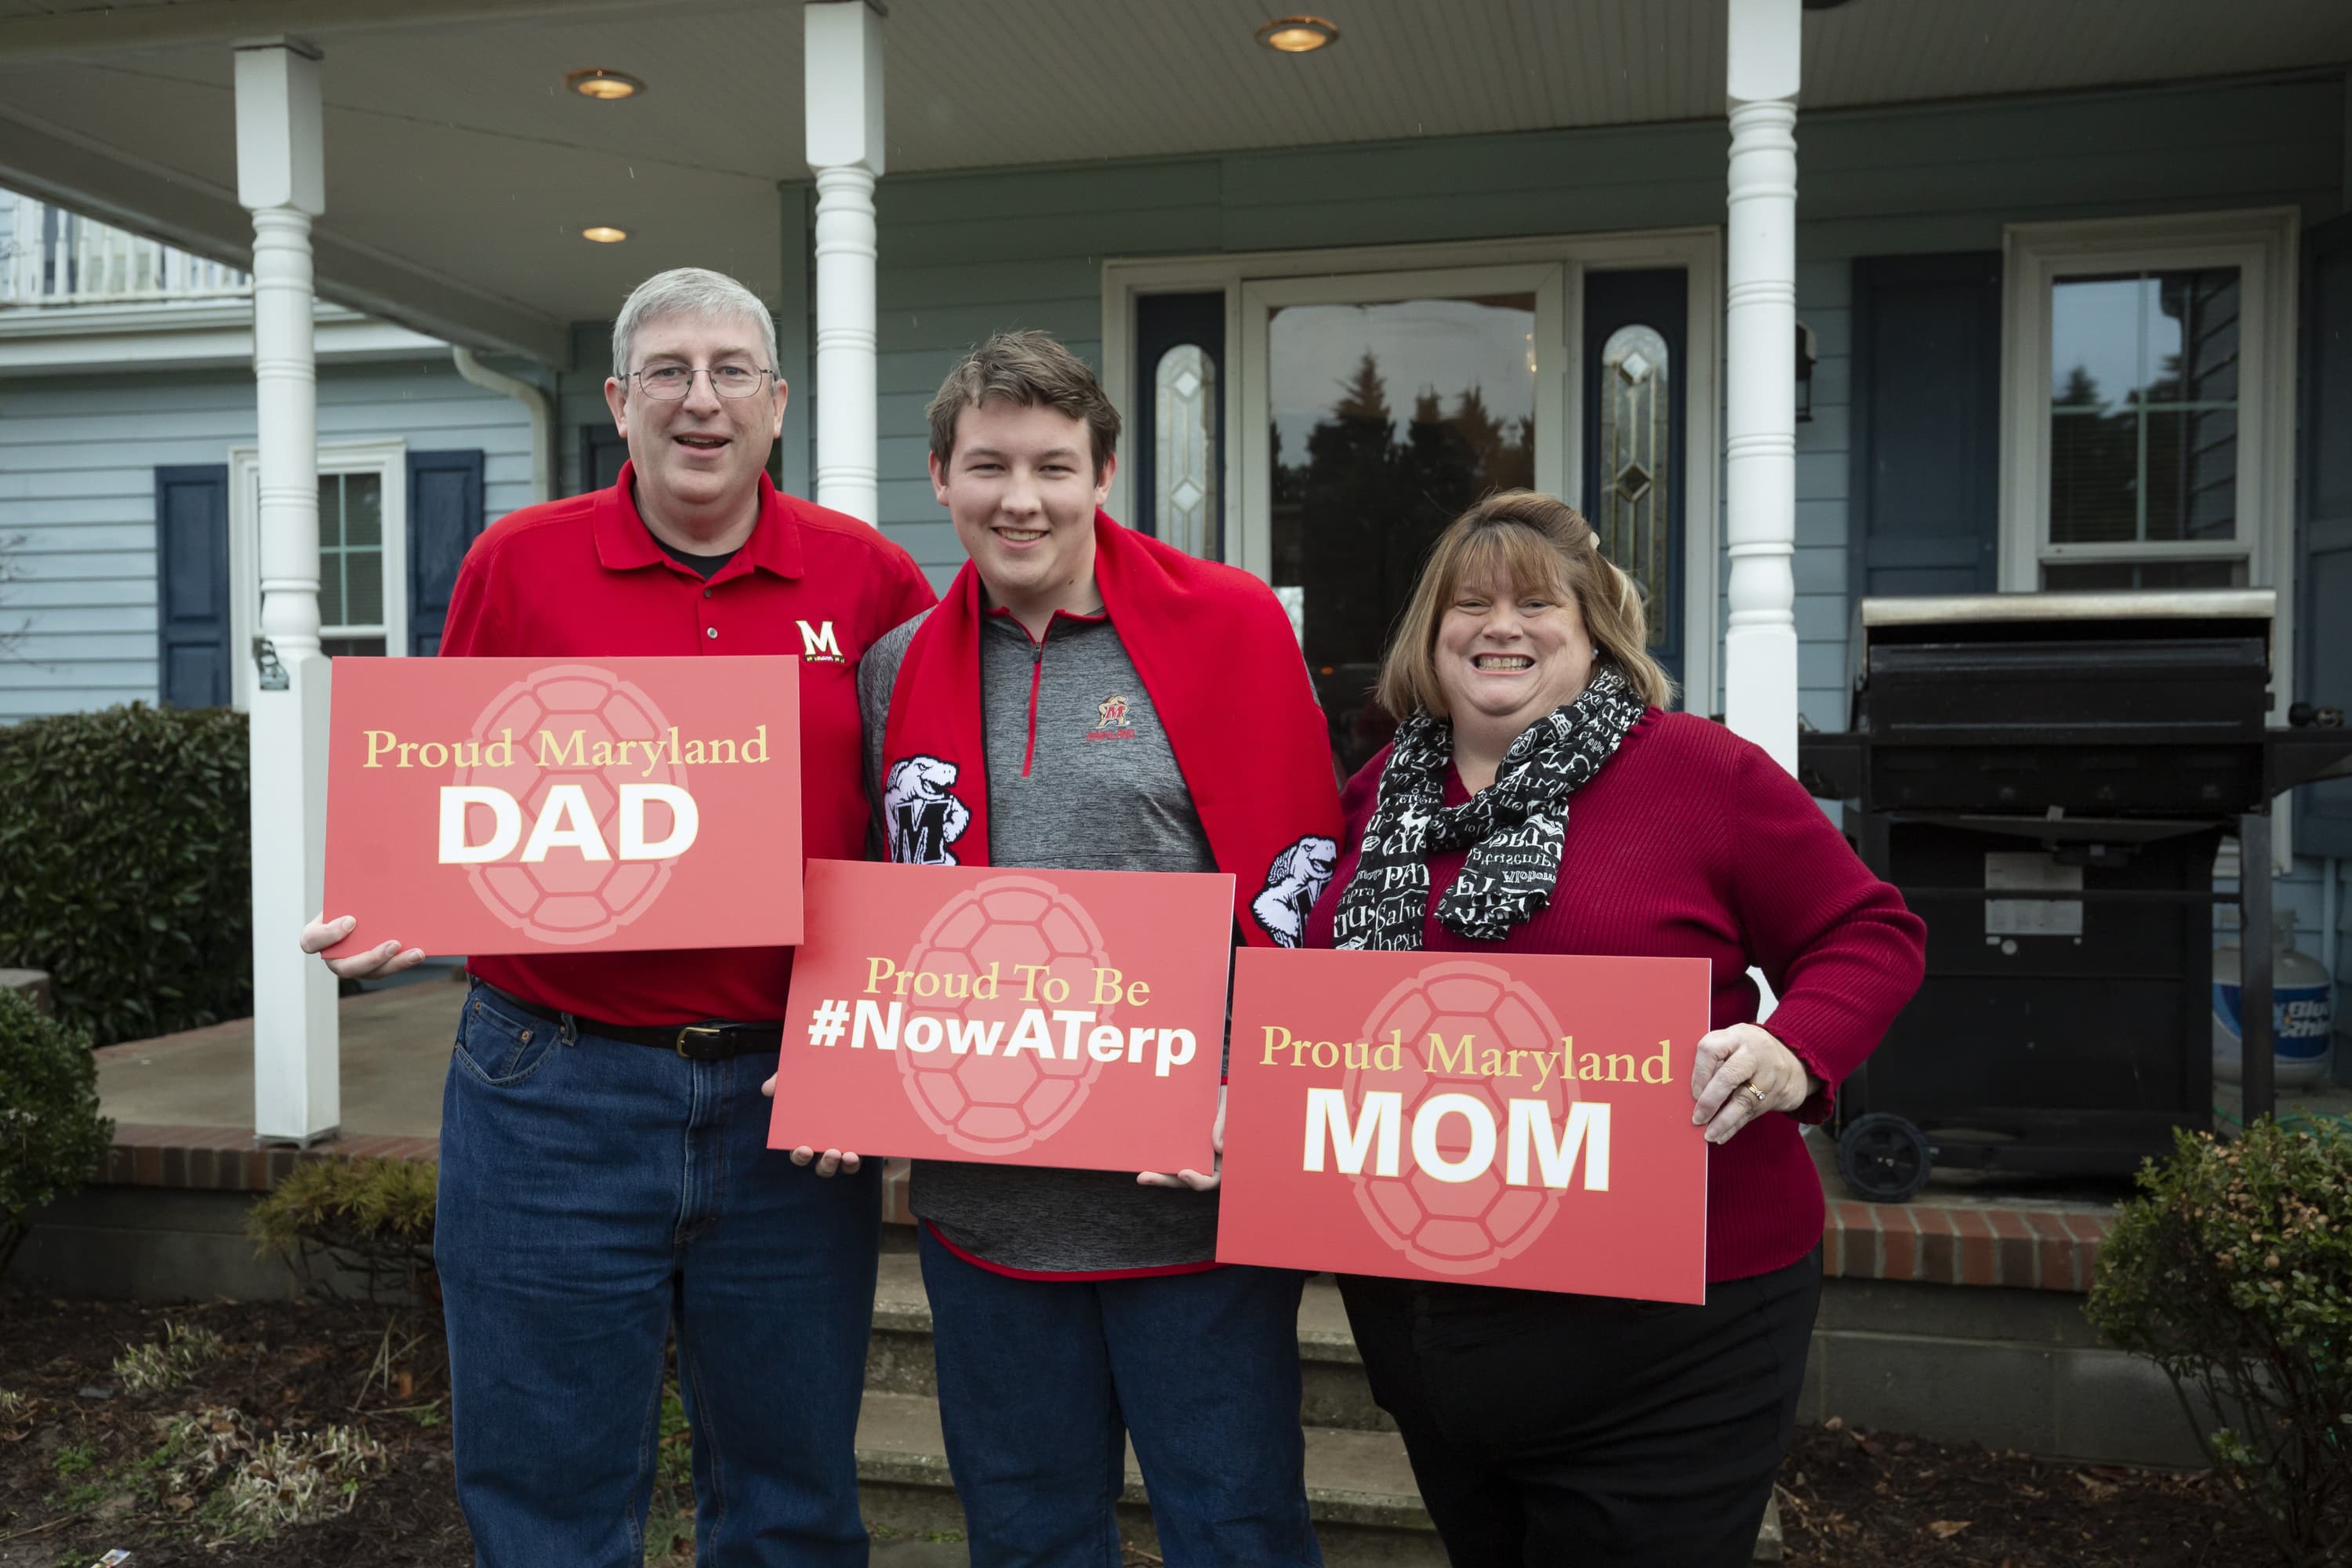 Father, mother and son pose for camera holding signs